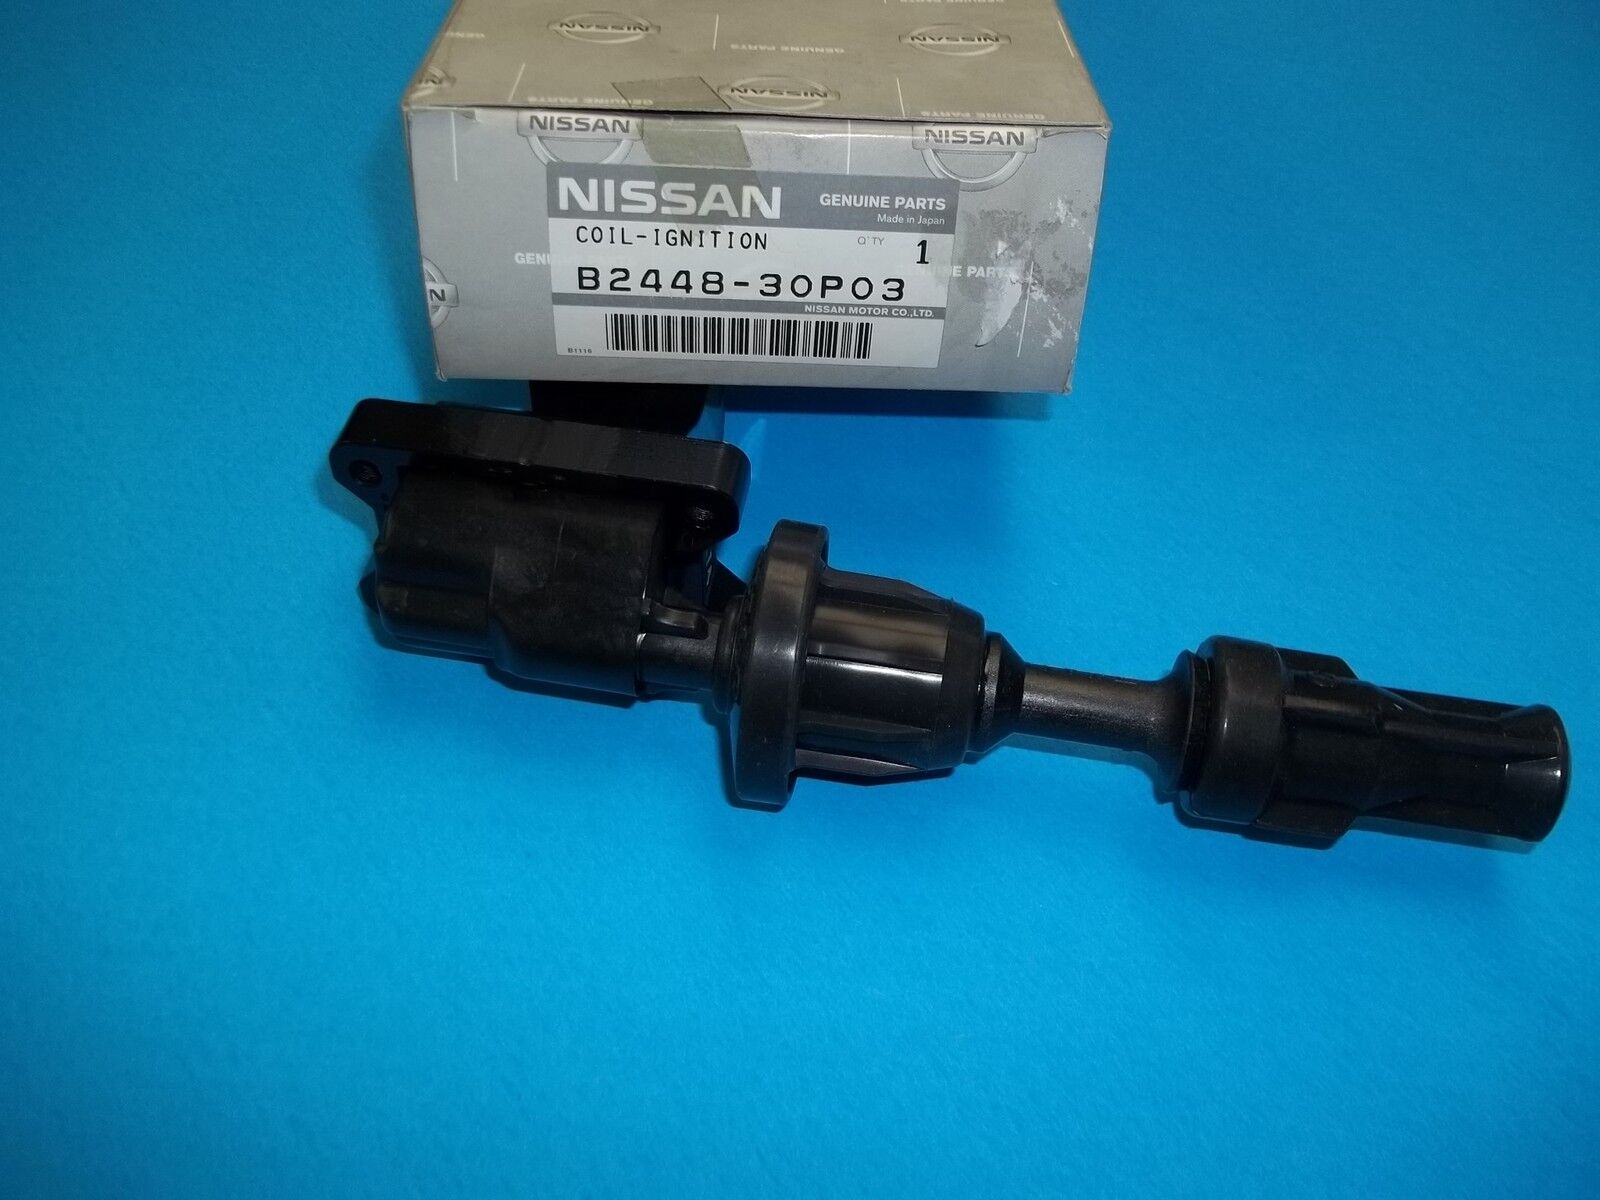 NISSAN 300ZX GENUINE IGNITION COIL ASSY B2448-30P03 